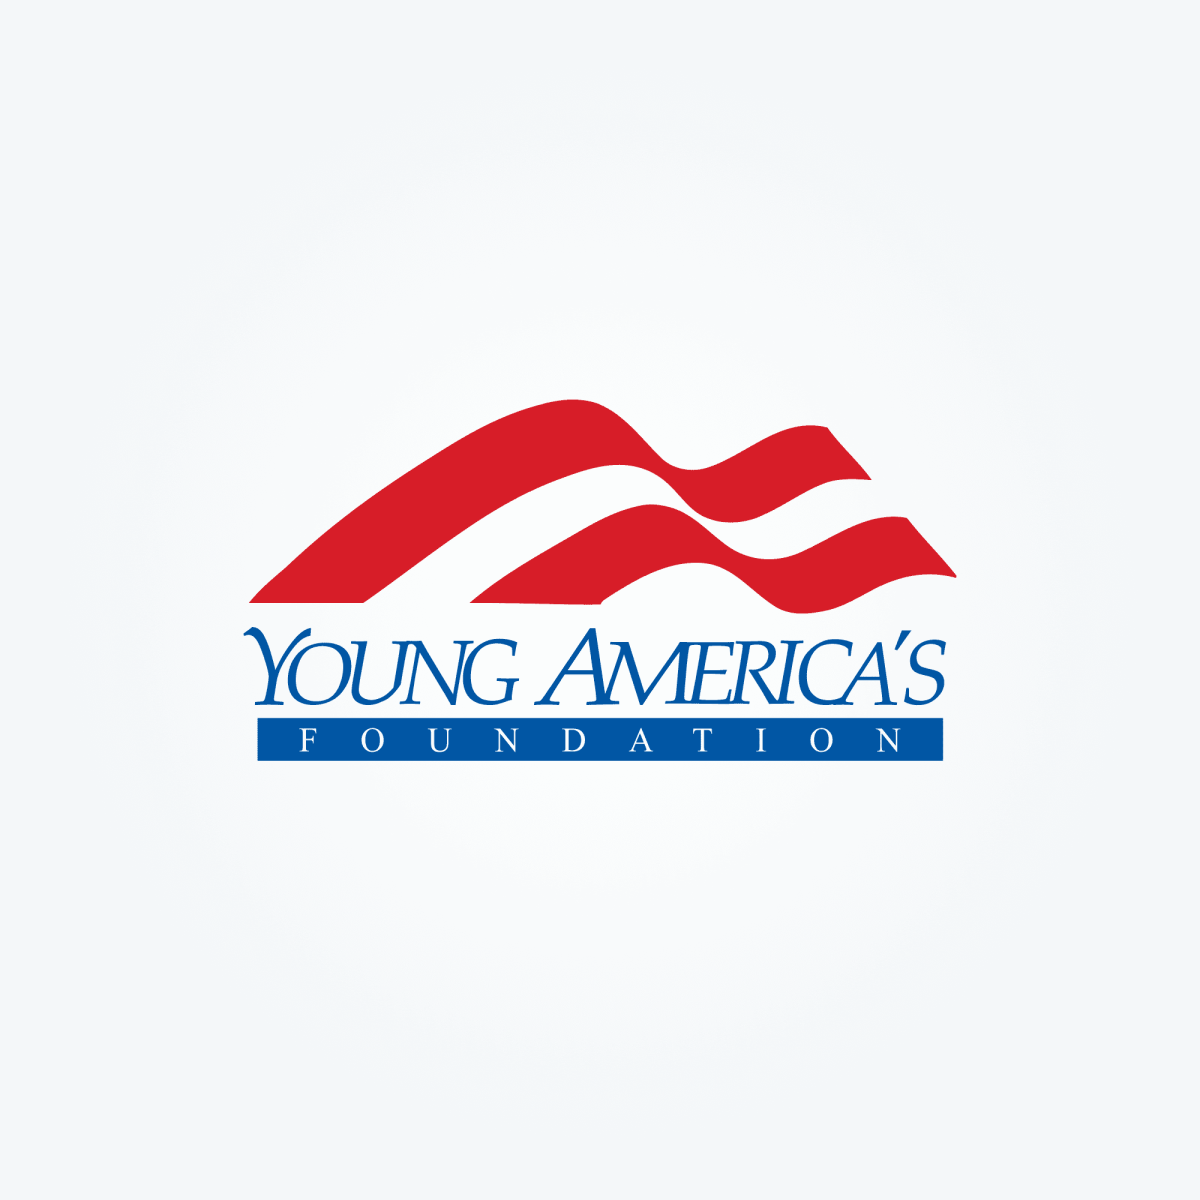 Young+Americas+Foundation+logo.+Image+retrieved+from+yaf.org.+